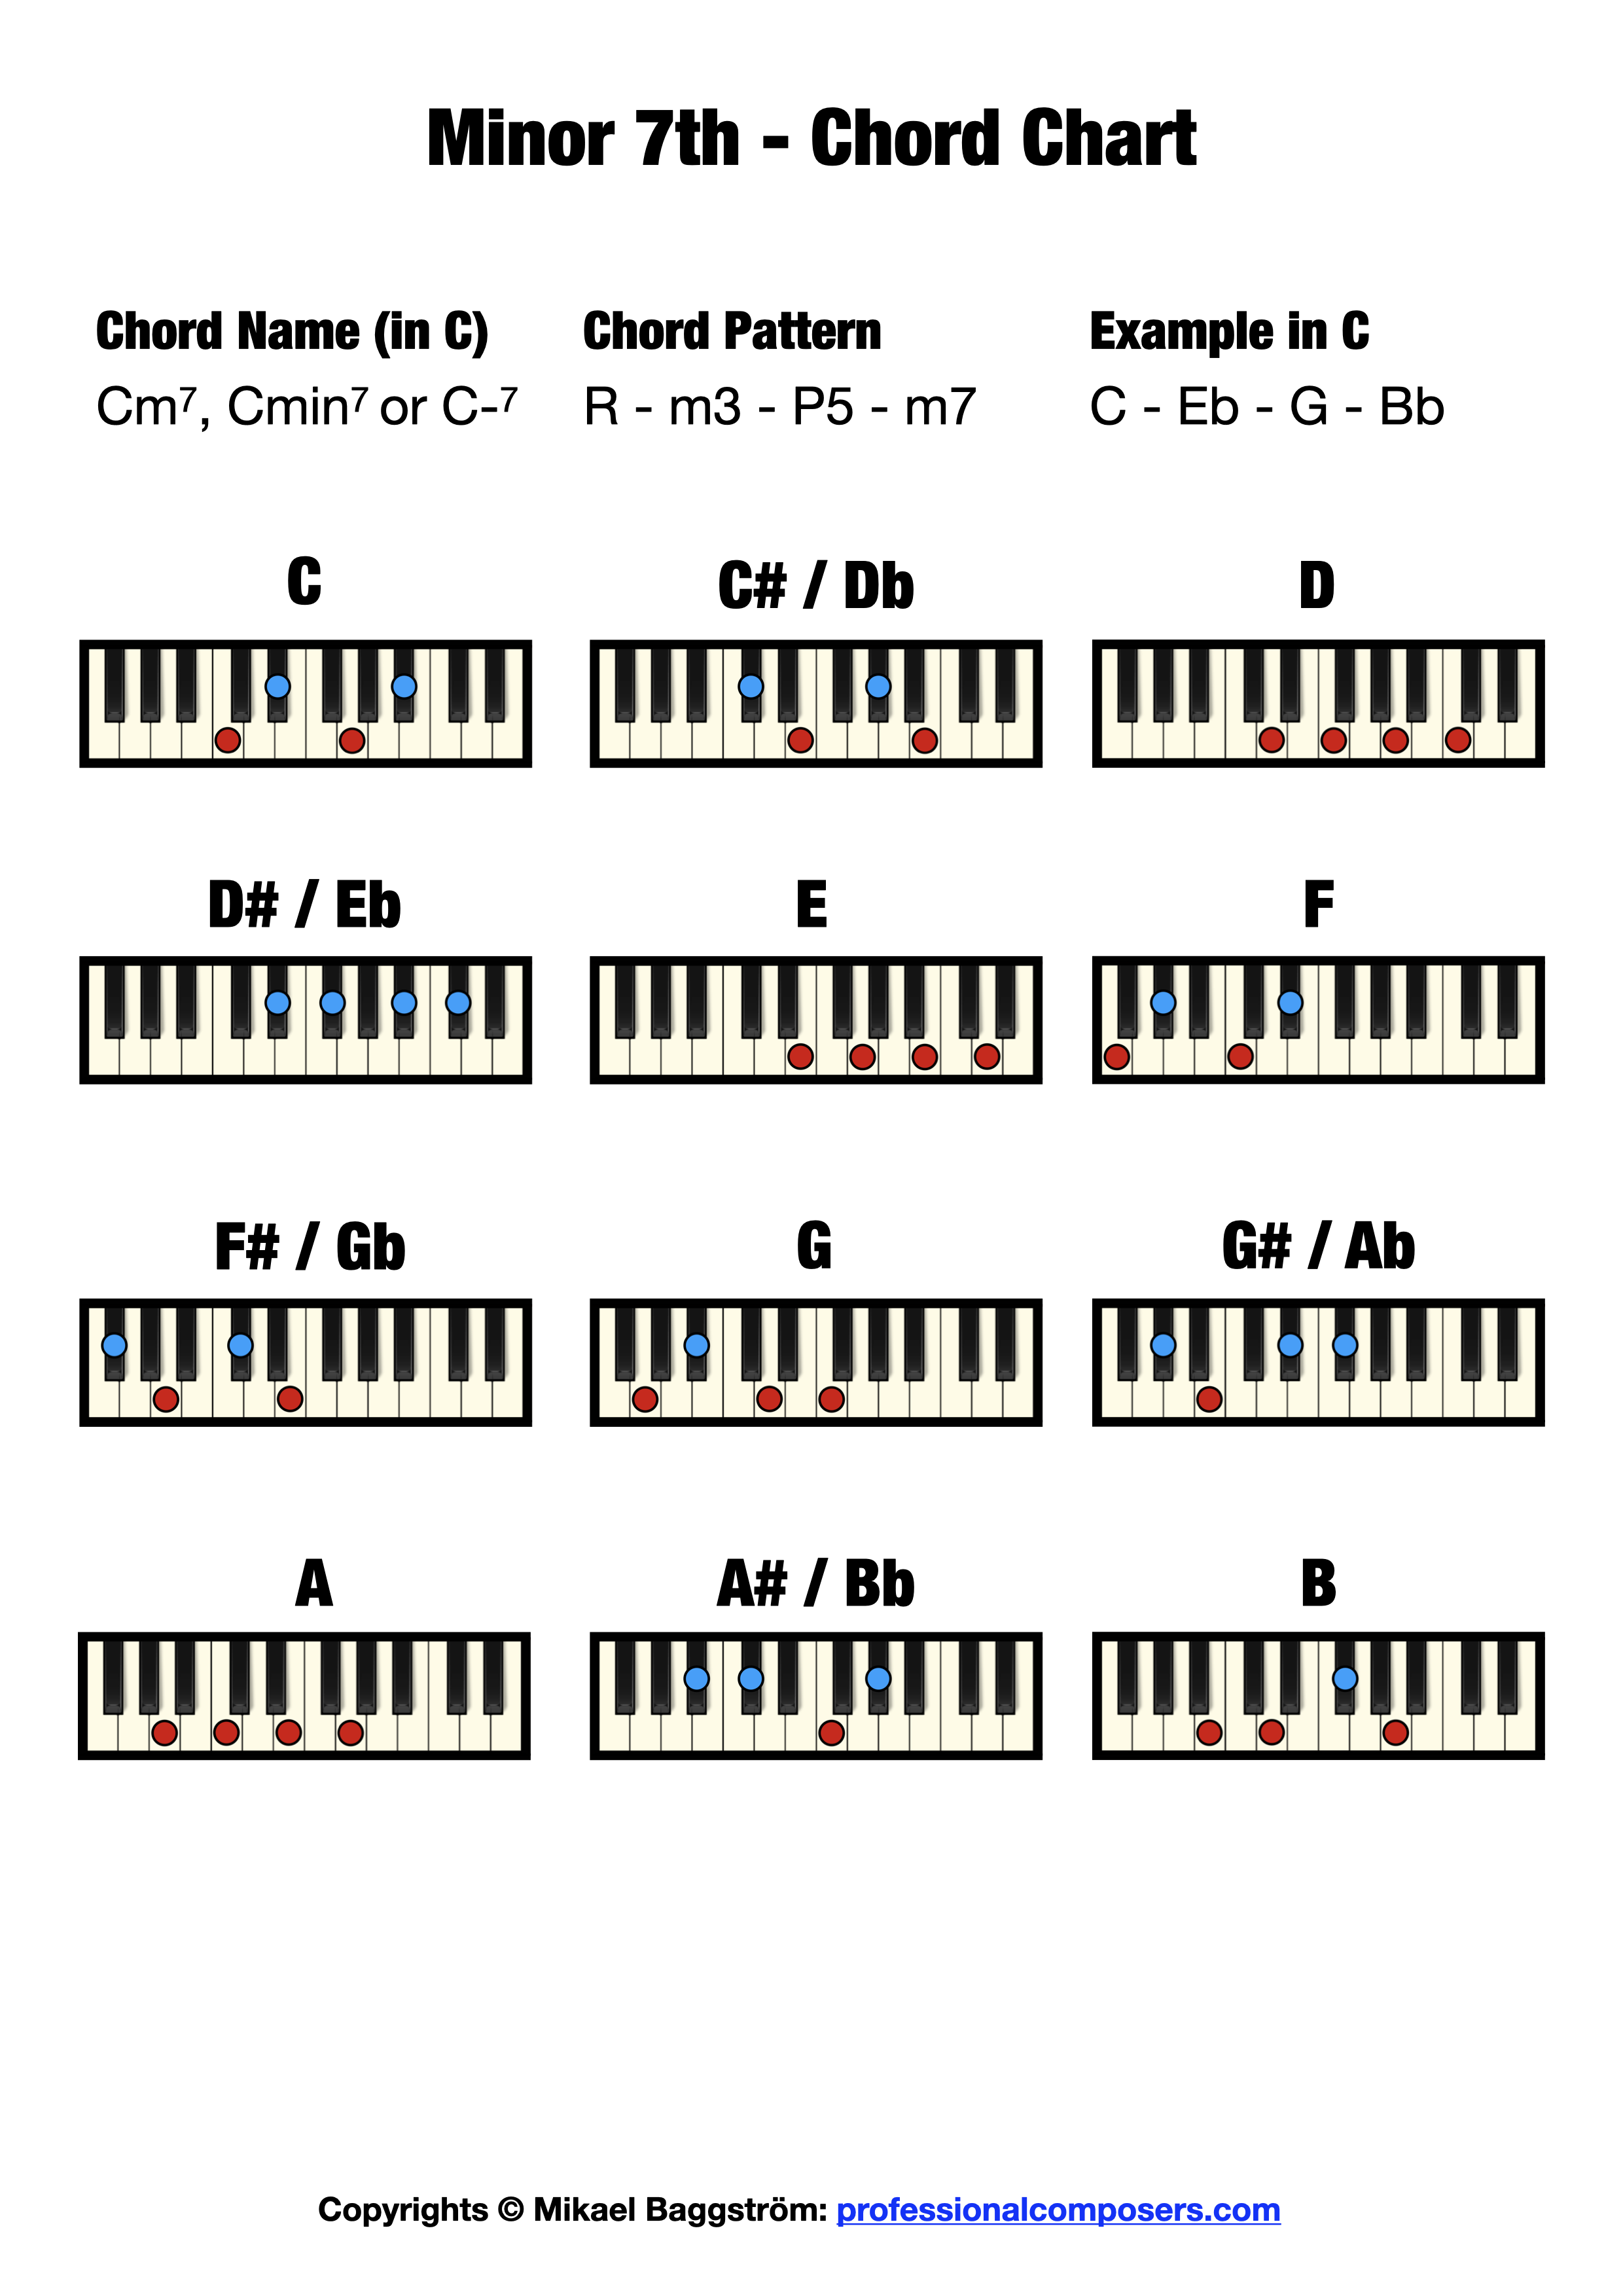 Minor 7th Chord on Piano (Free Chord Chart) Professional Composers